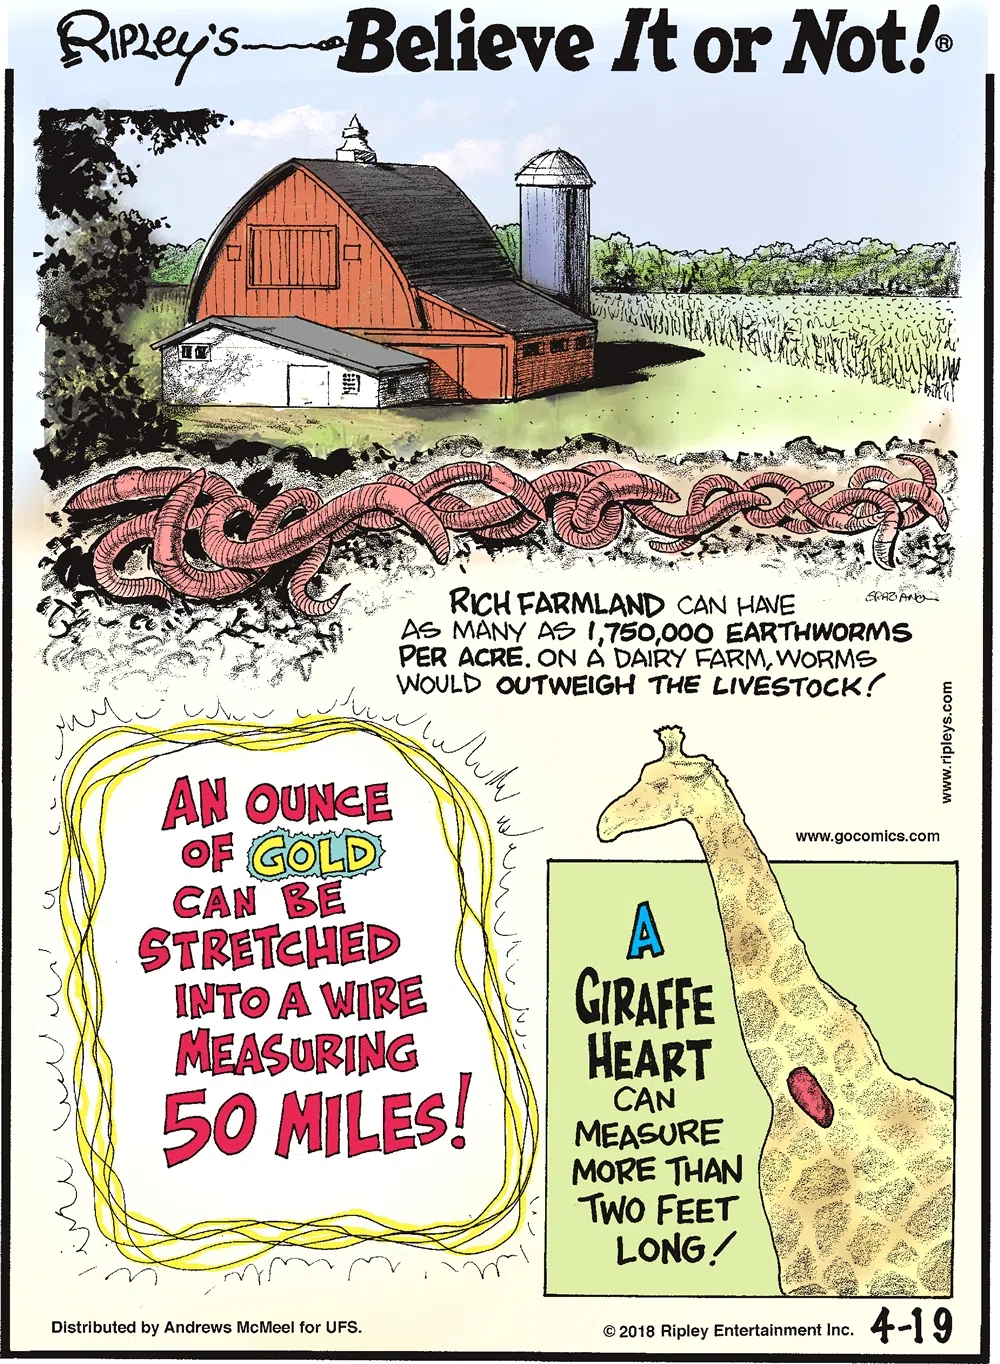 Rich farmland can have as many as 1,750,000 earthworms per acre. On a dairy farm, worms would outweigh the livestock!-------------------- An ounce of gold can be stretched into a wire measuring 50 miles!-------------------- A giraffe heart can measure more than two feet long!